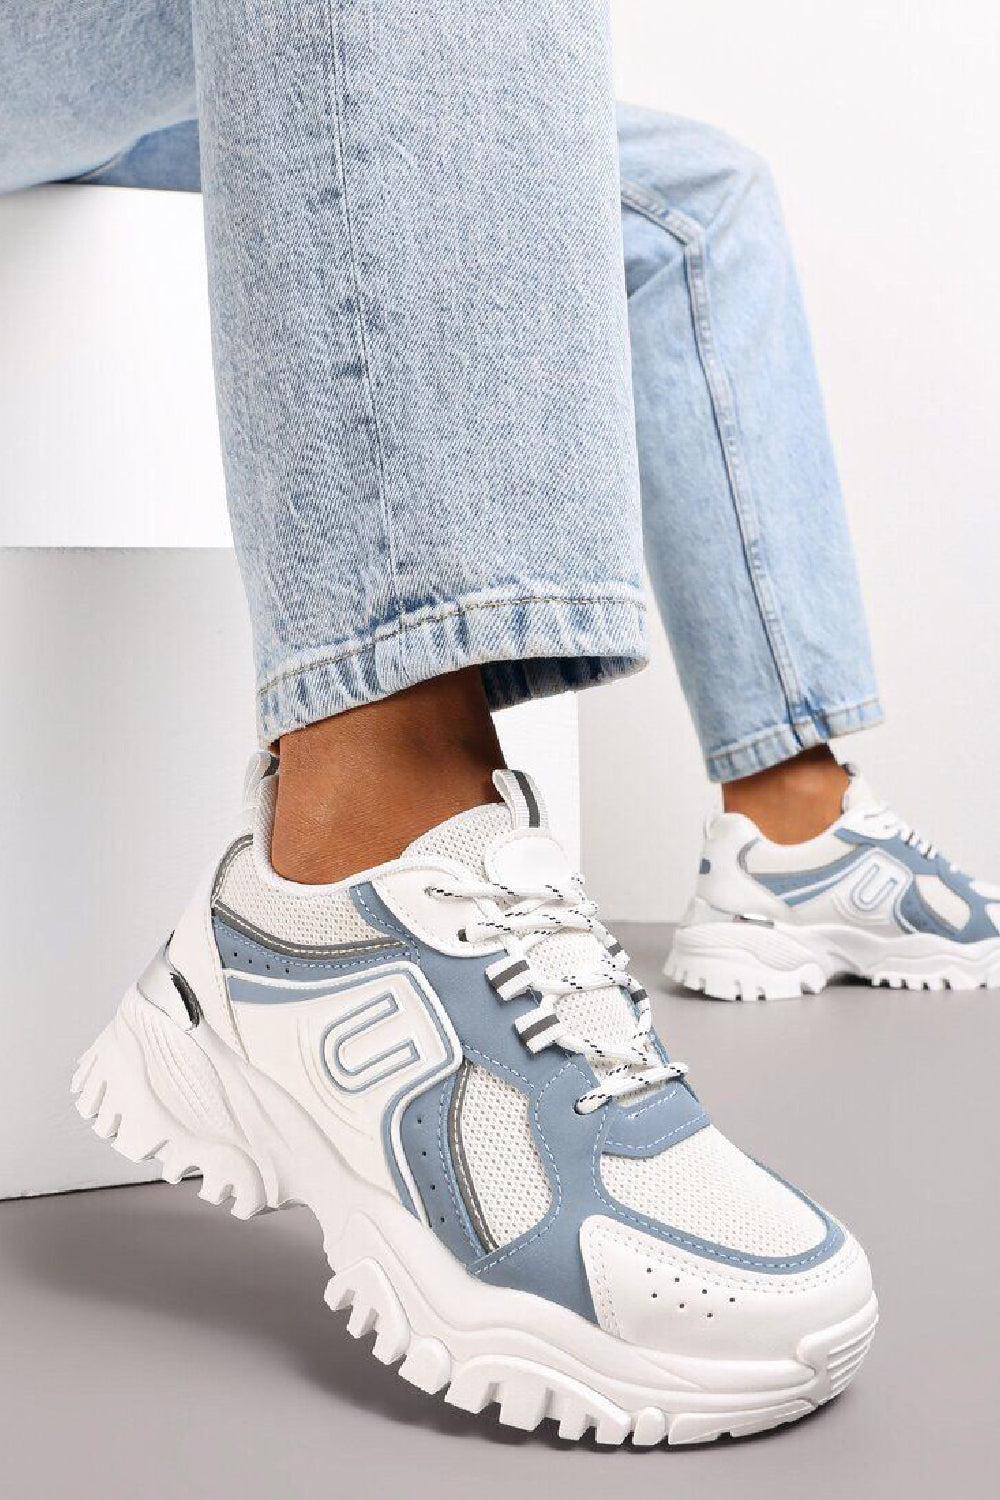 WHITE LACE UP CHUNKY FLAT TRAINERS WITH GOLD HEEL CLIP SIDE DETAIL